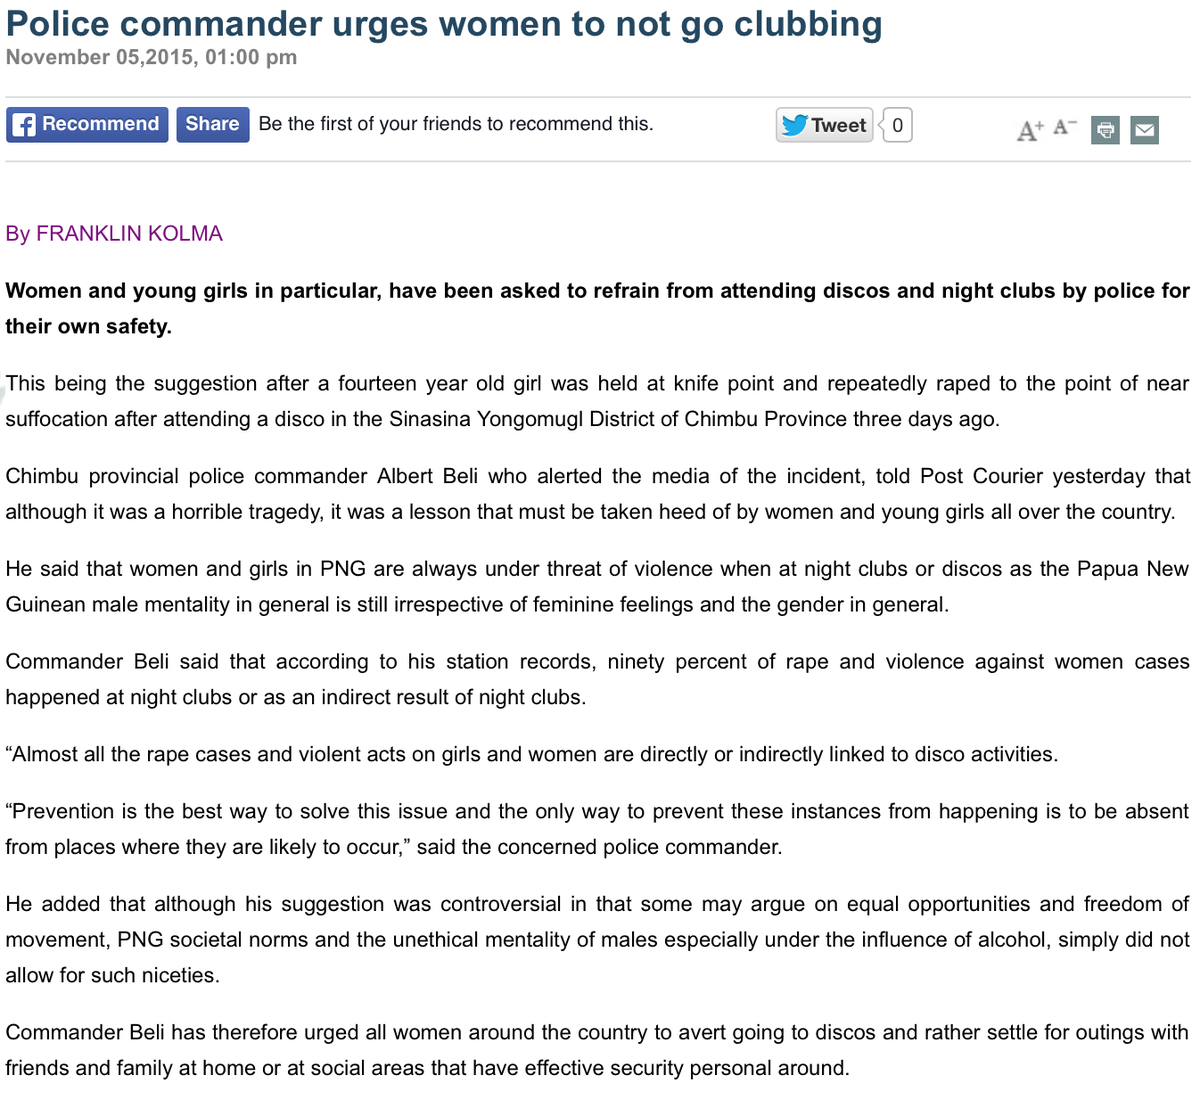 #PNG police warn women off going to nightclubs to avoid rape and violence. Via @Post_Courier @FranklinKolma